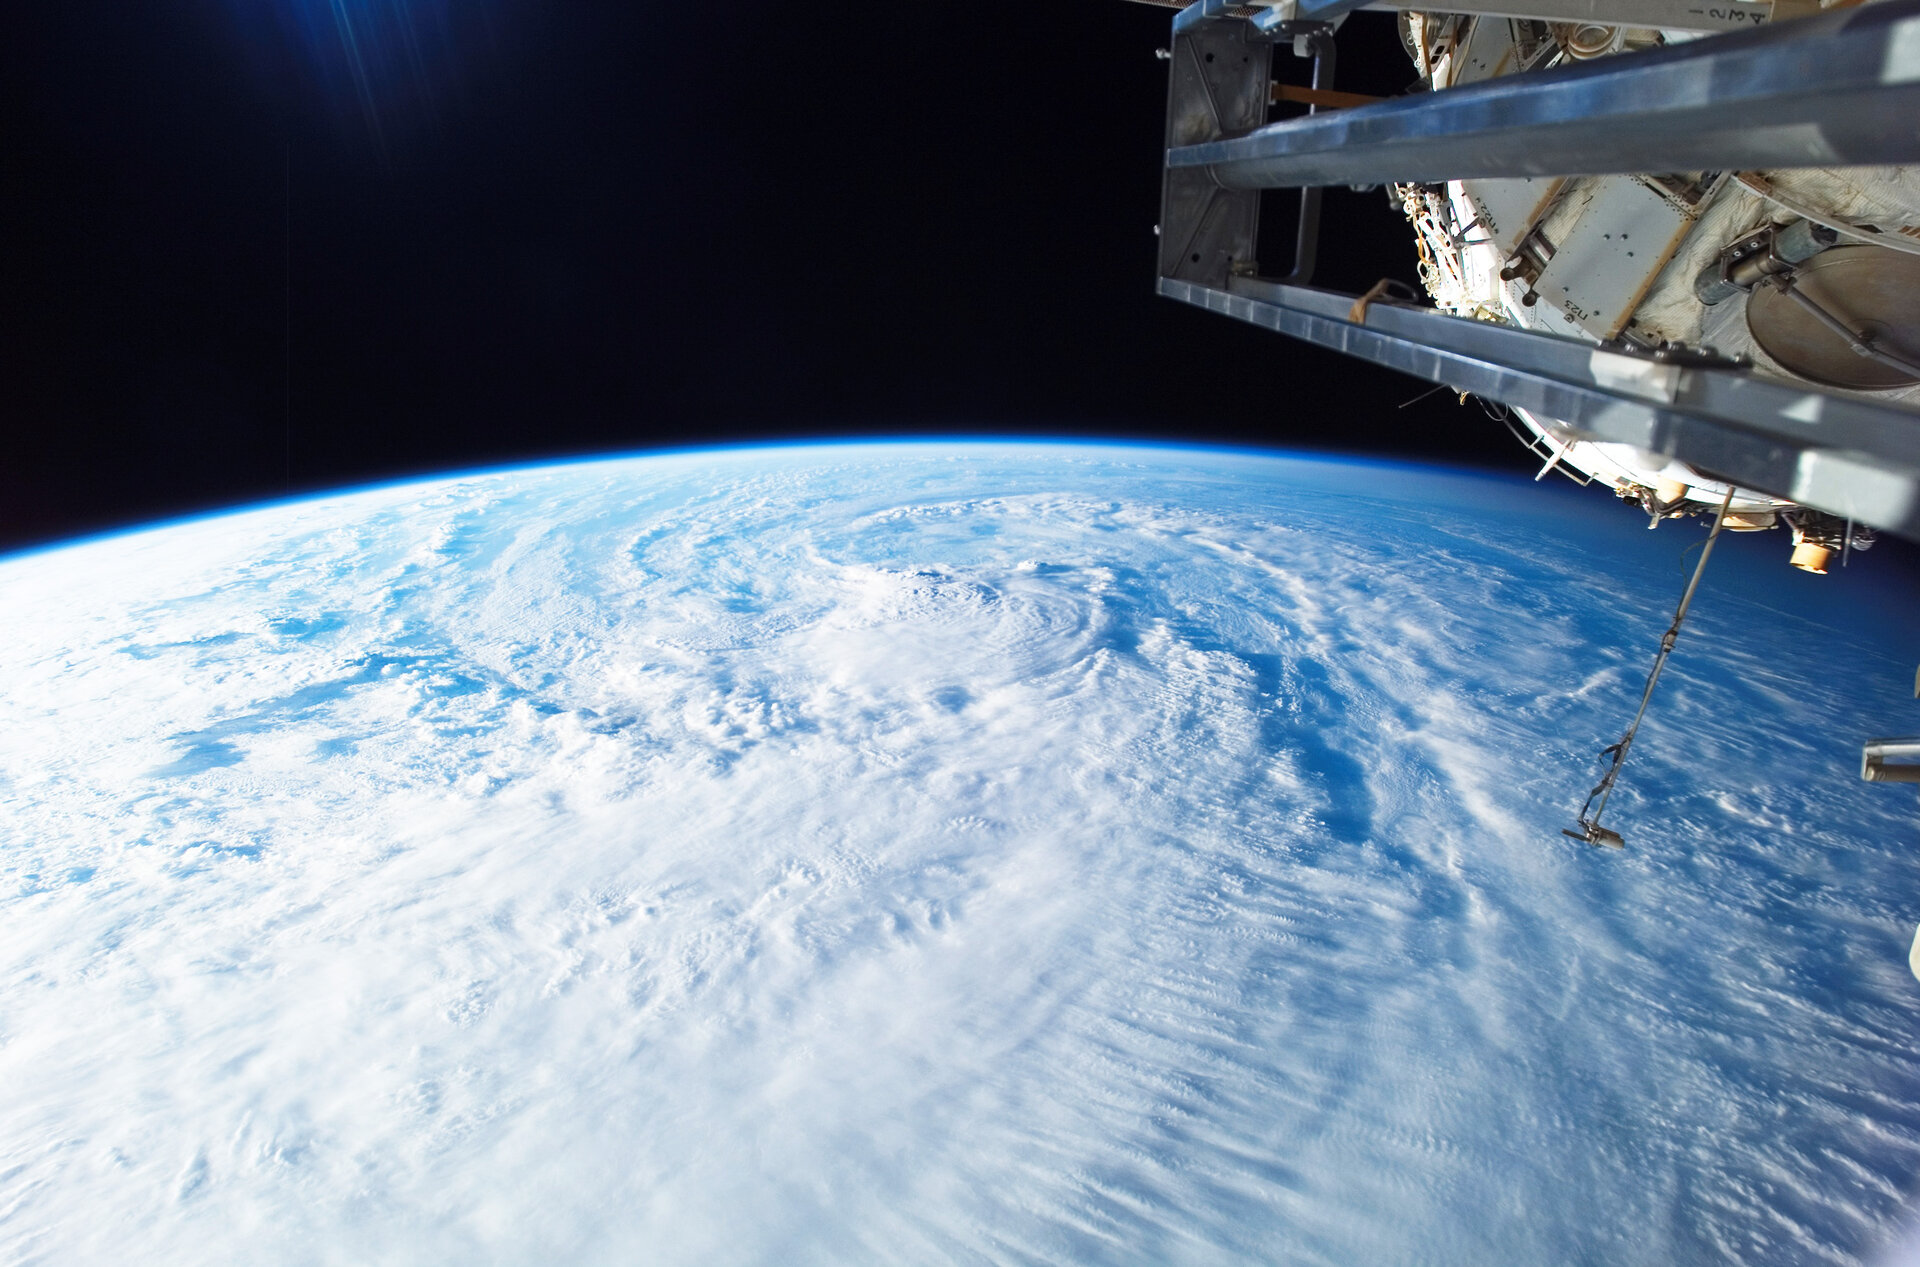 Earth view captured from on board the International Space Station during the STS-120 mission